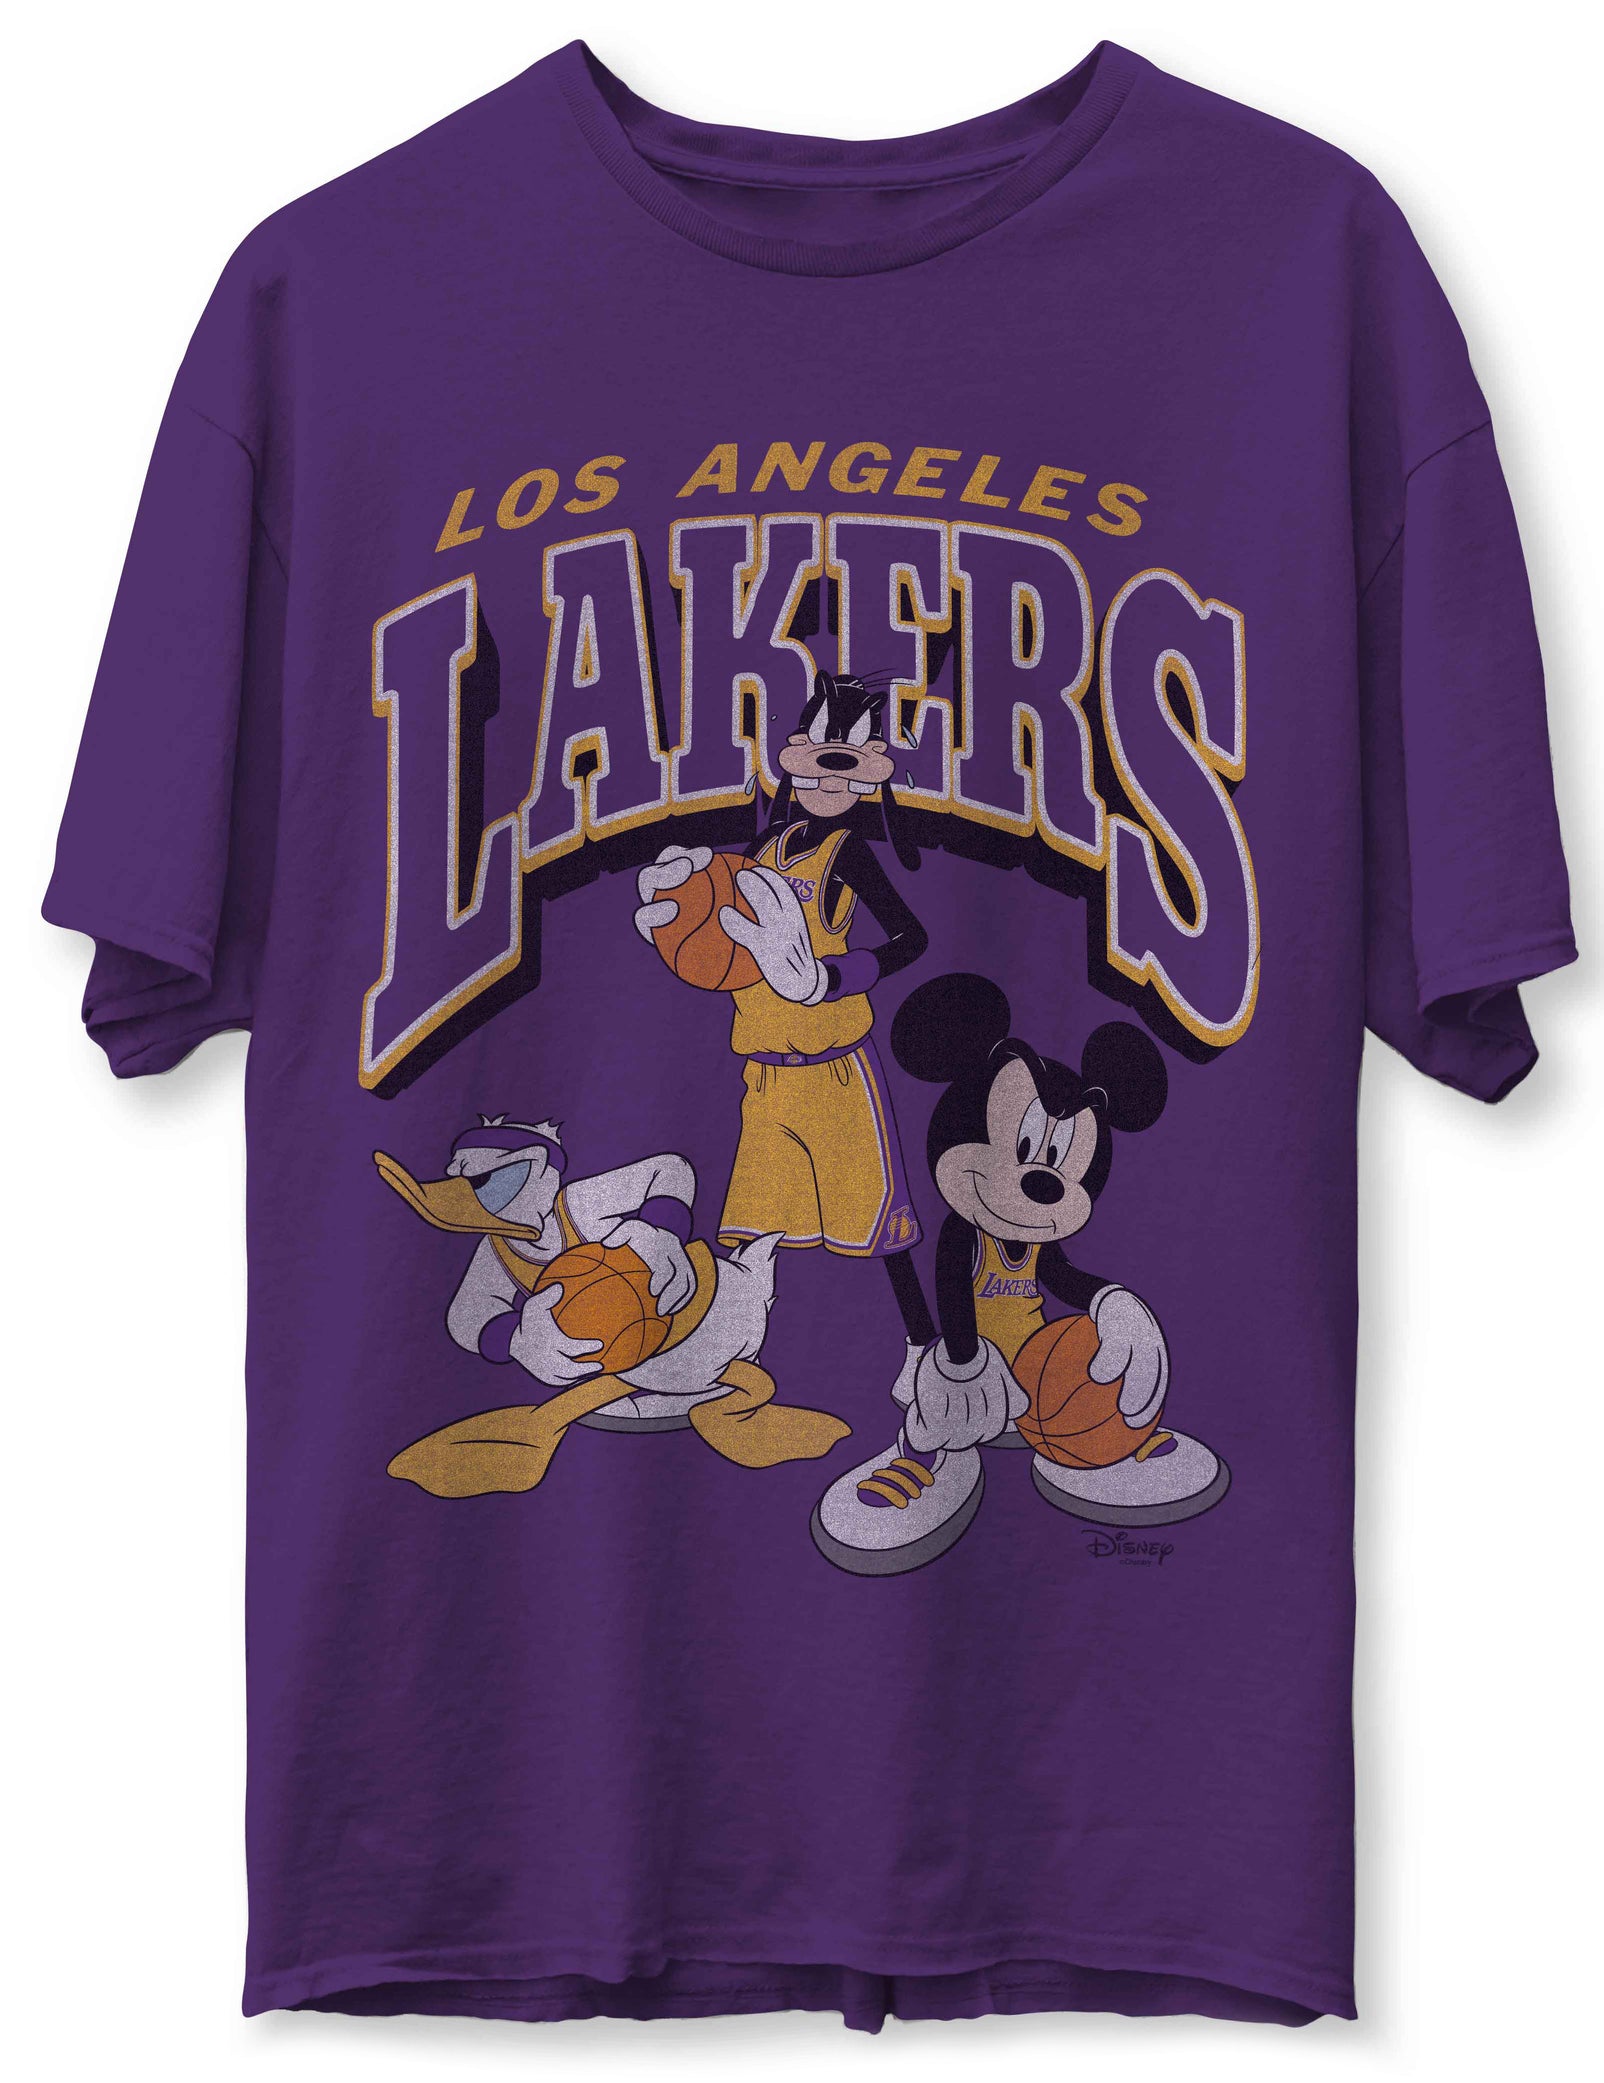 los angeles lakers mickey mouse T-shirt by SHWZ on DeviantArt